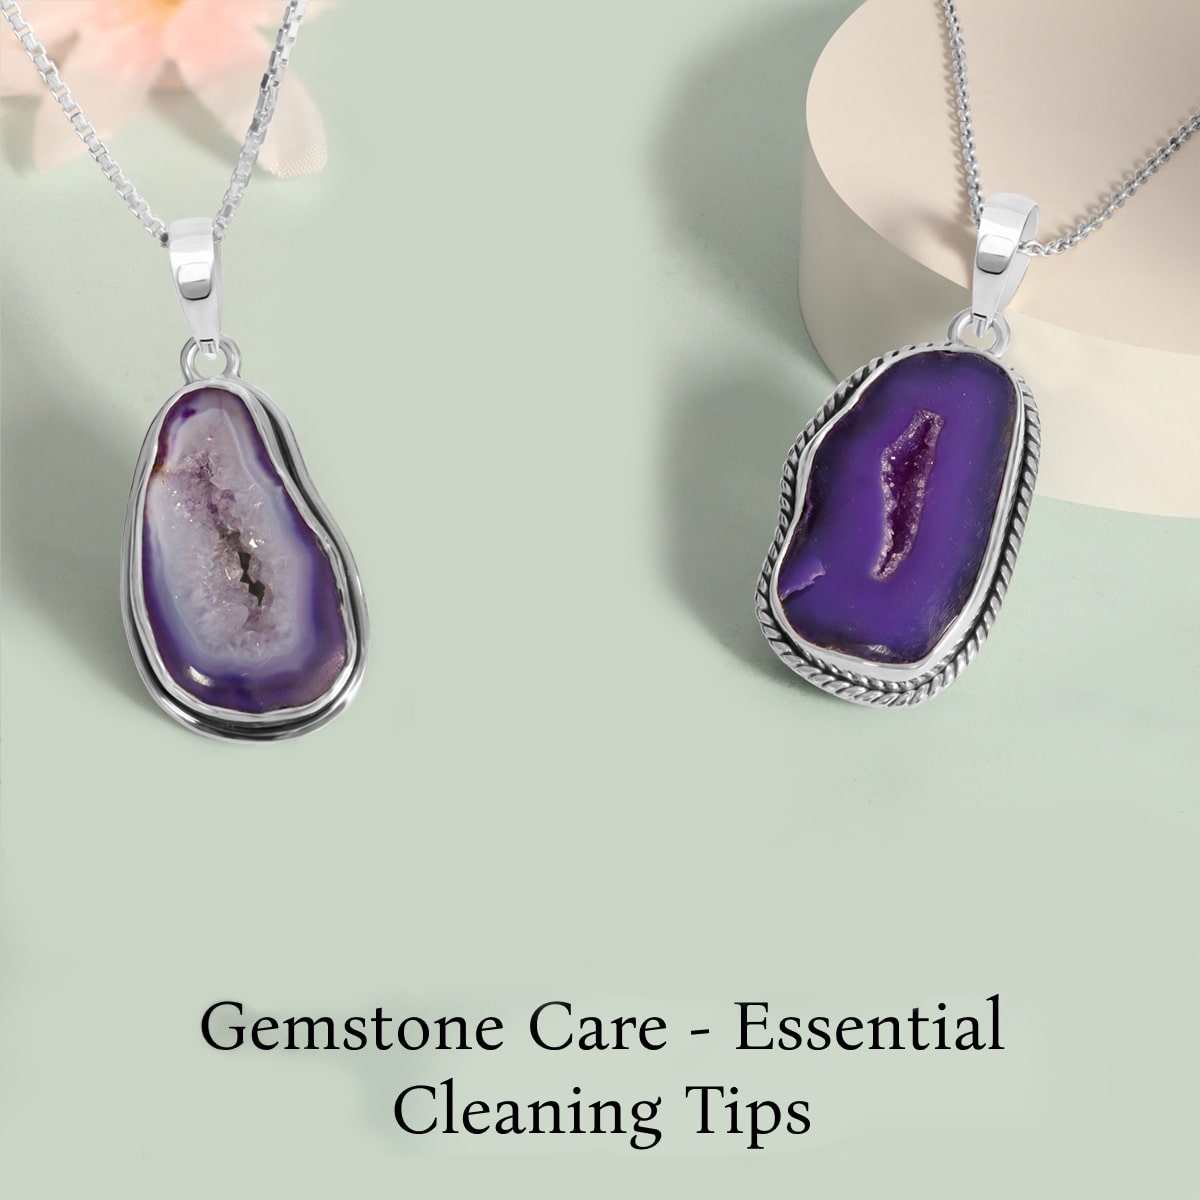 Cleaning of the Gemstone